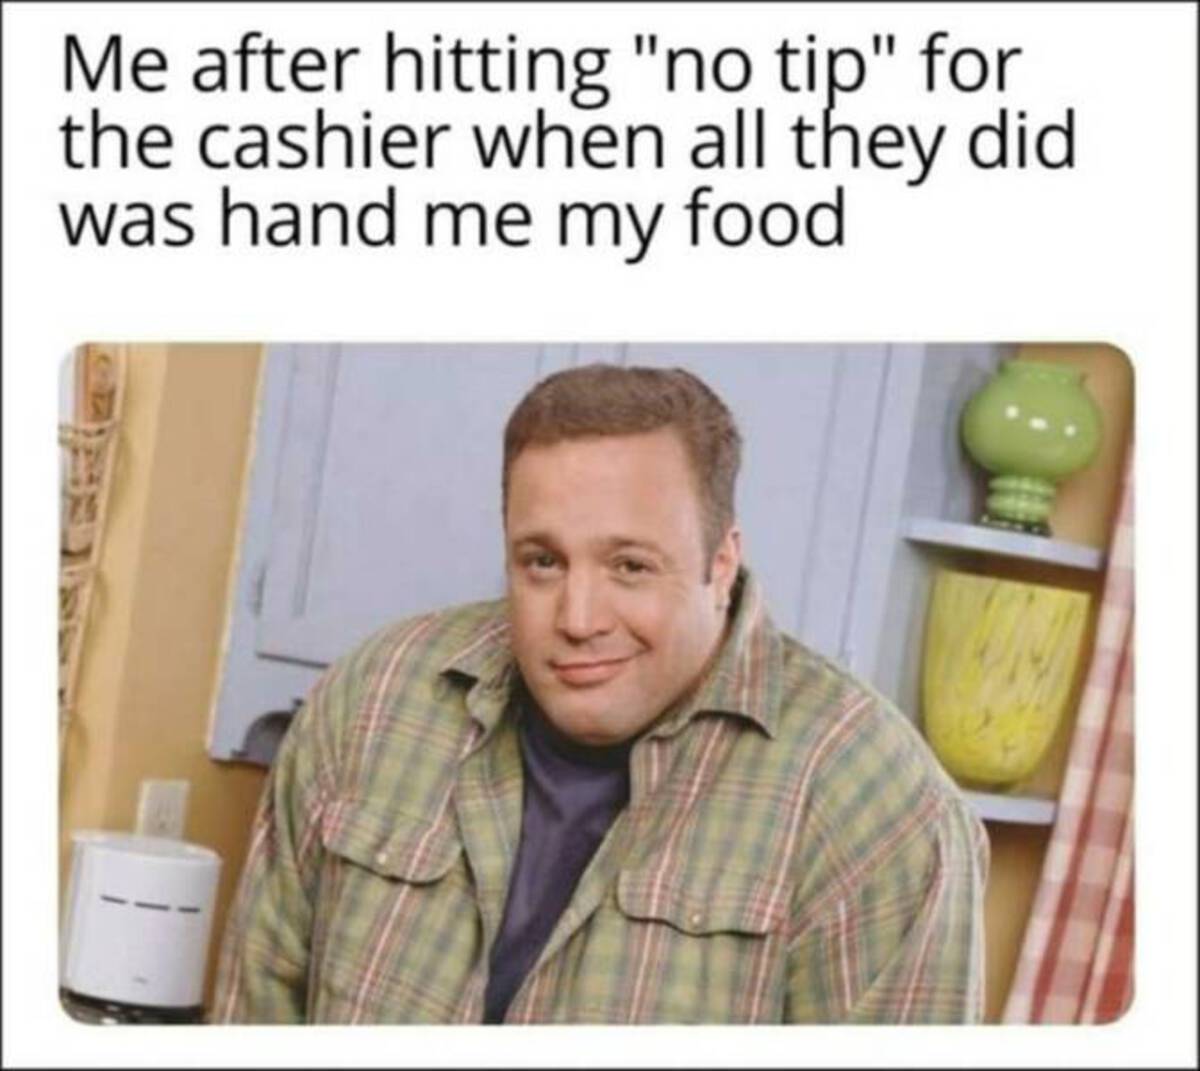 guy with hands in pockets meme - Me after hitting "no tip" for the cashier when all they did was hand me my food